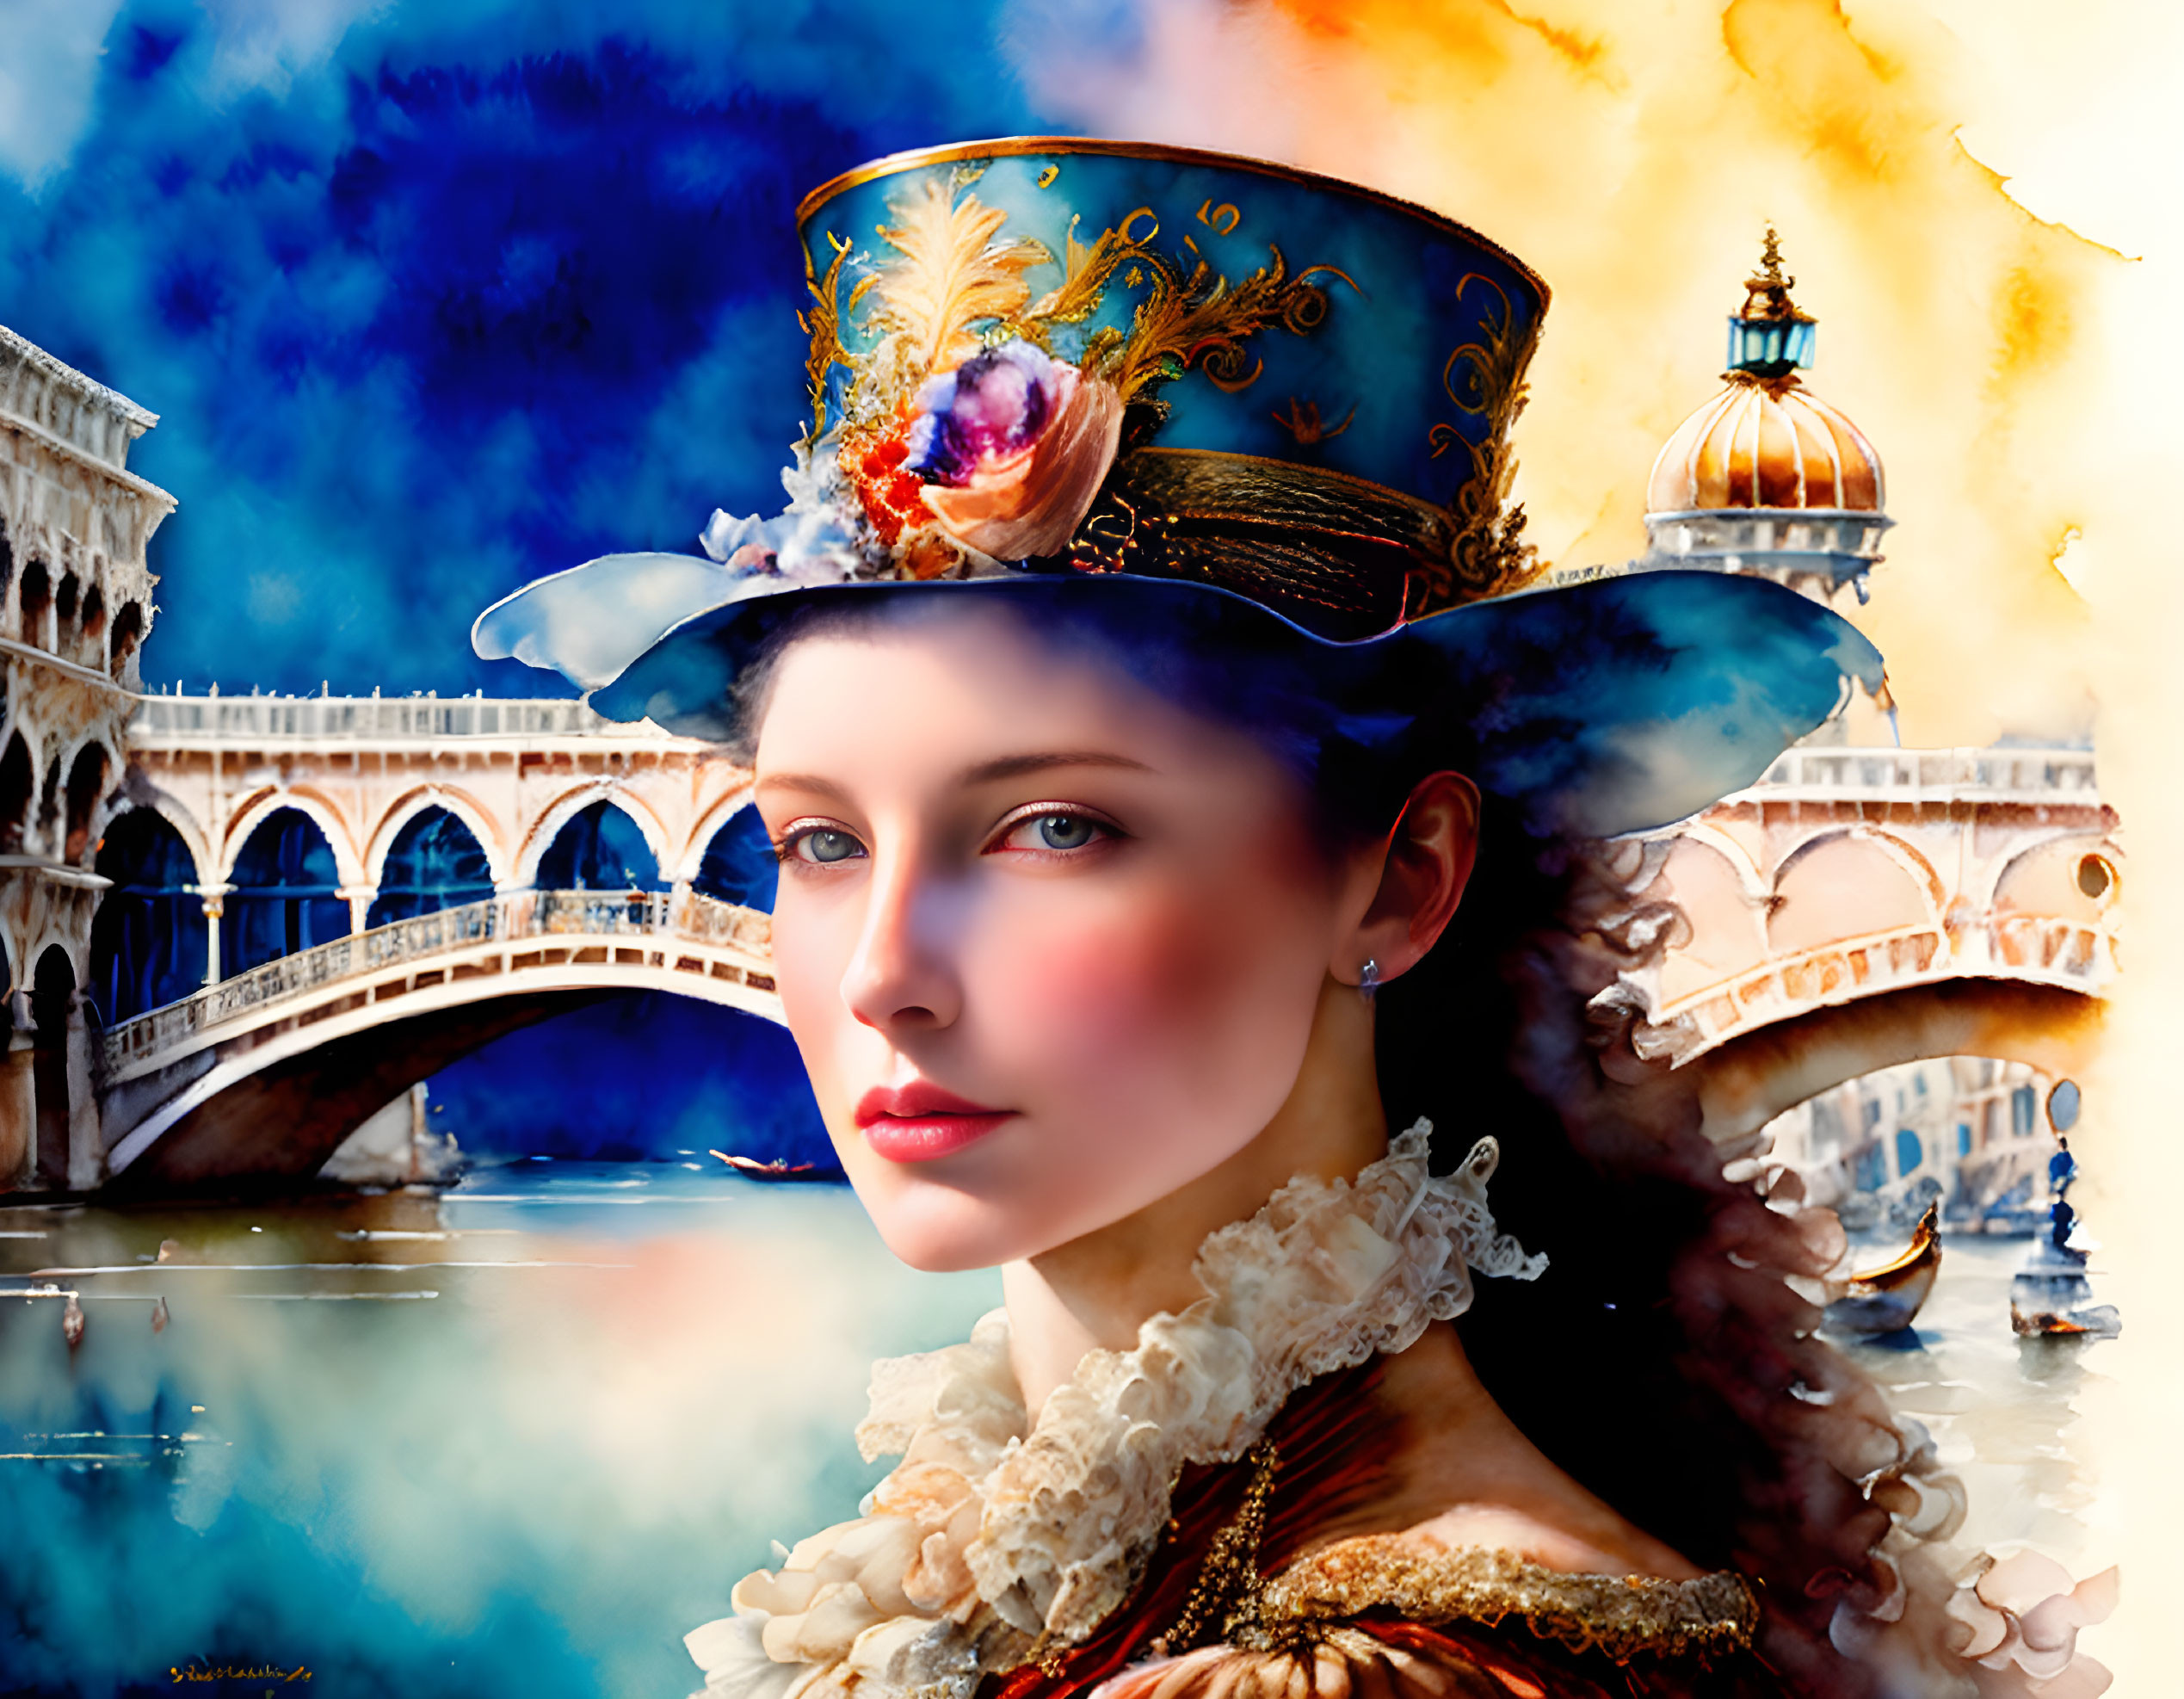 Vibrant digital artwork of woman in decorative hat with Venetian canal scene